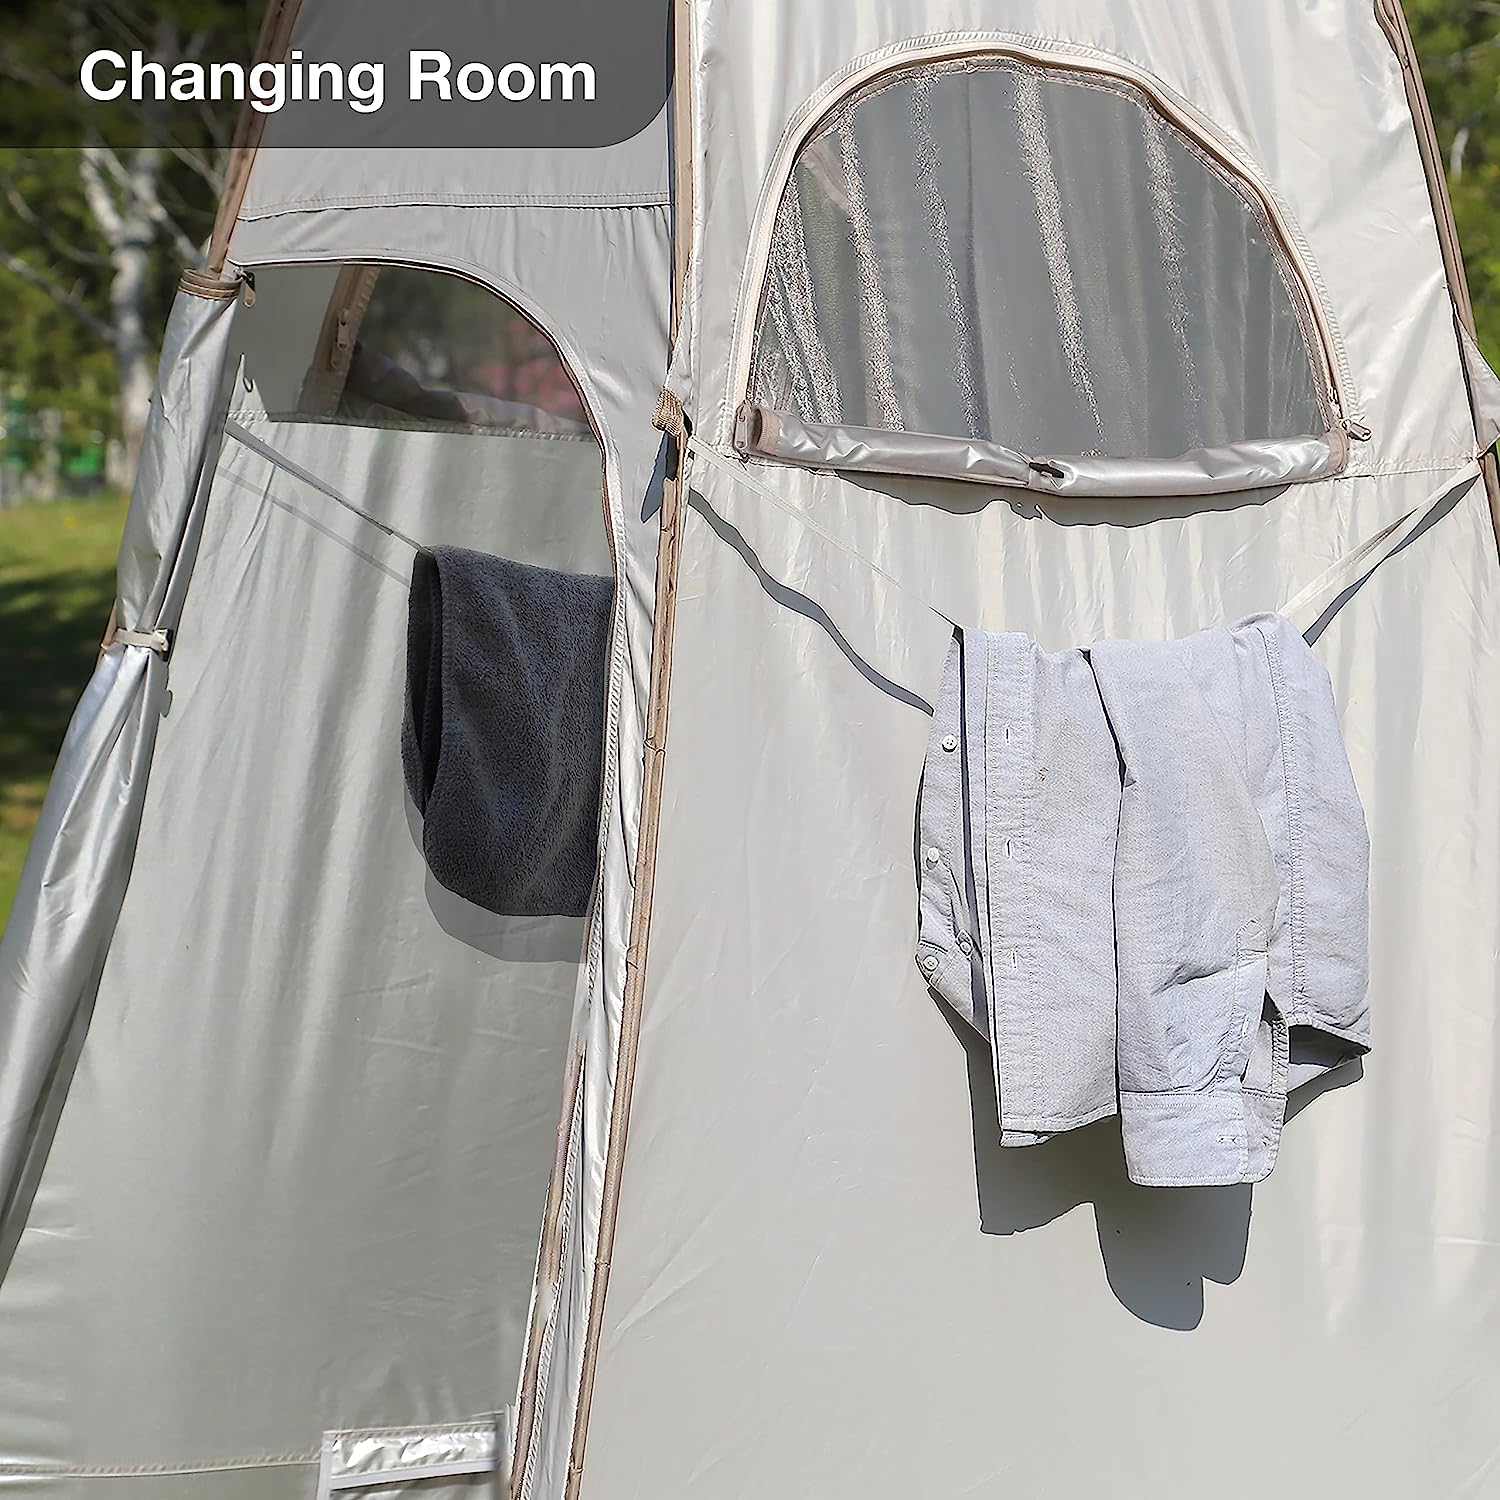 TRIPTIPS Pop Up Shower Tent with Floor Changing Tent with Mesh Window